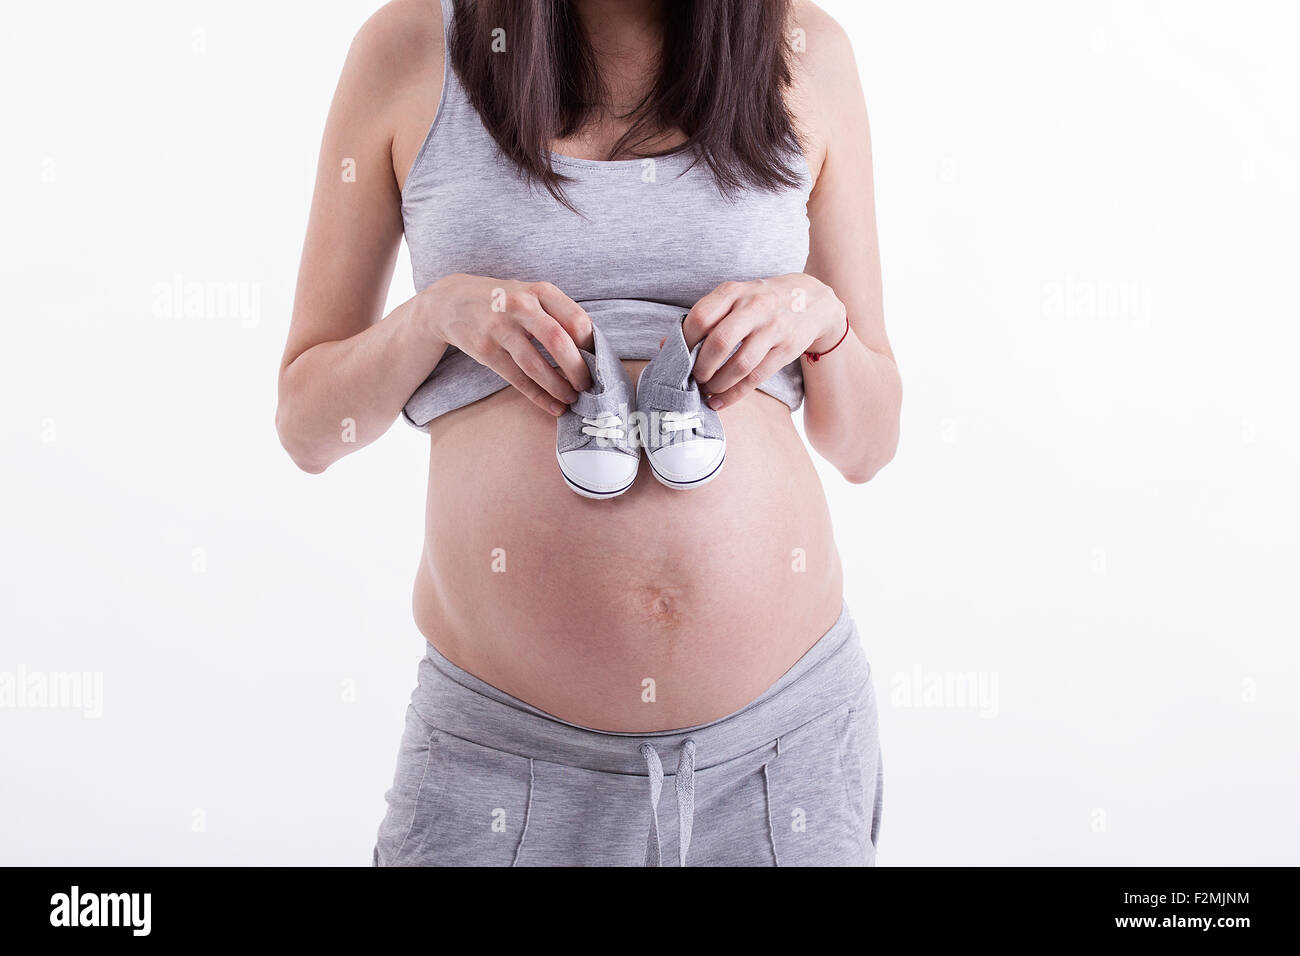 Small shoes for the unborn baby in the belly of pregnant woman Stock Photo